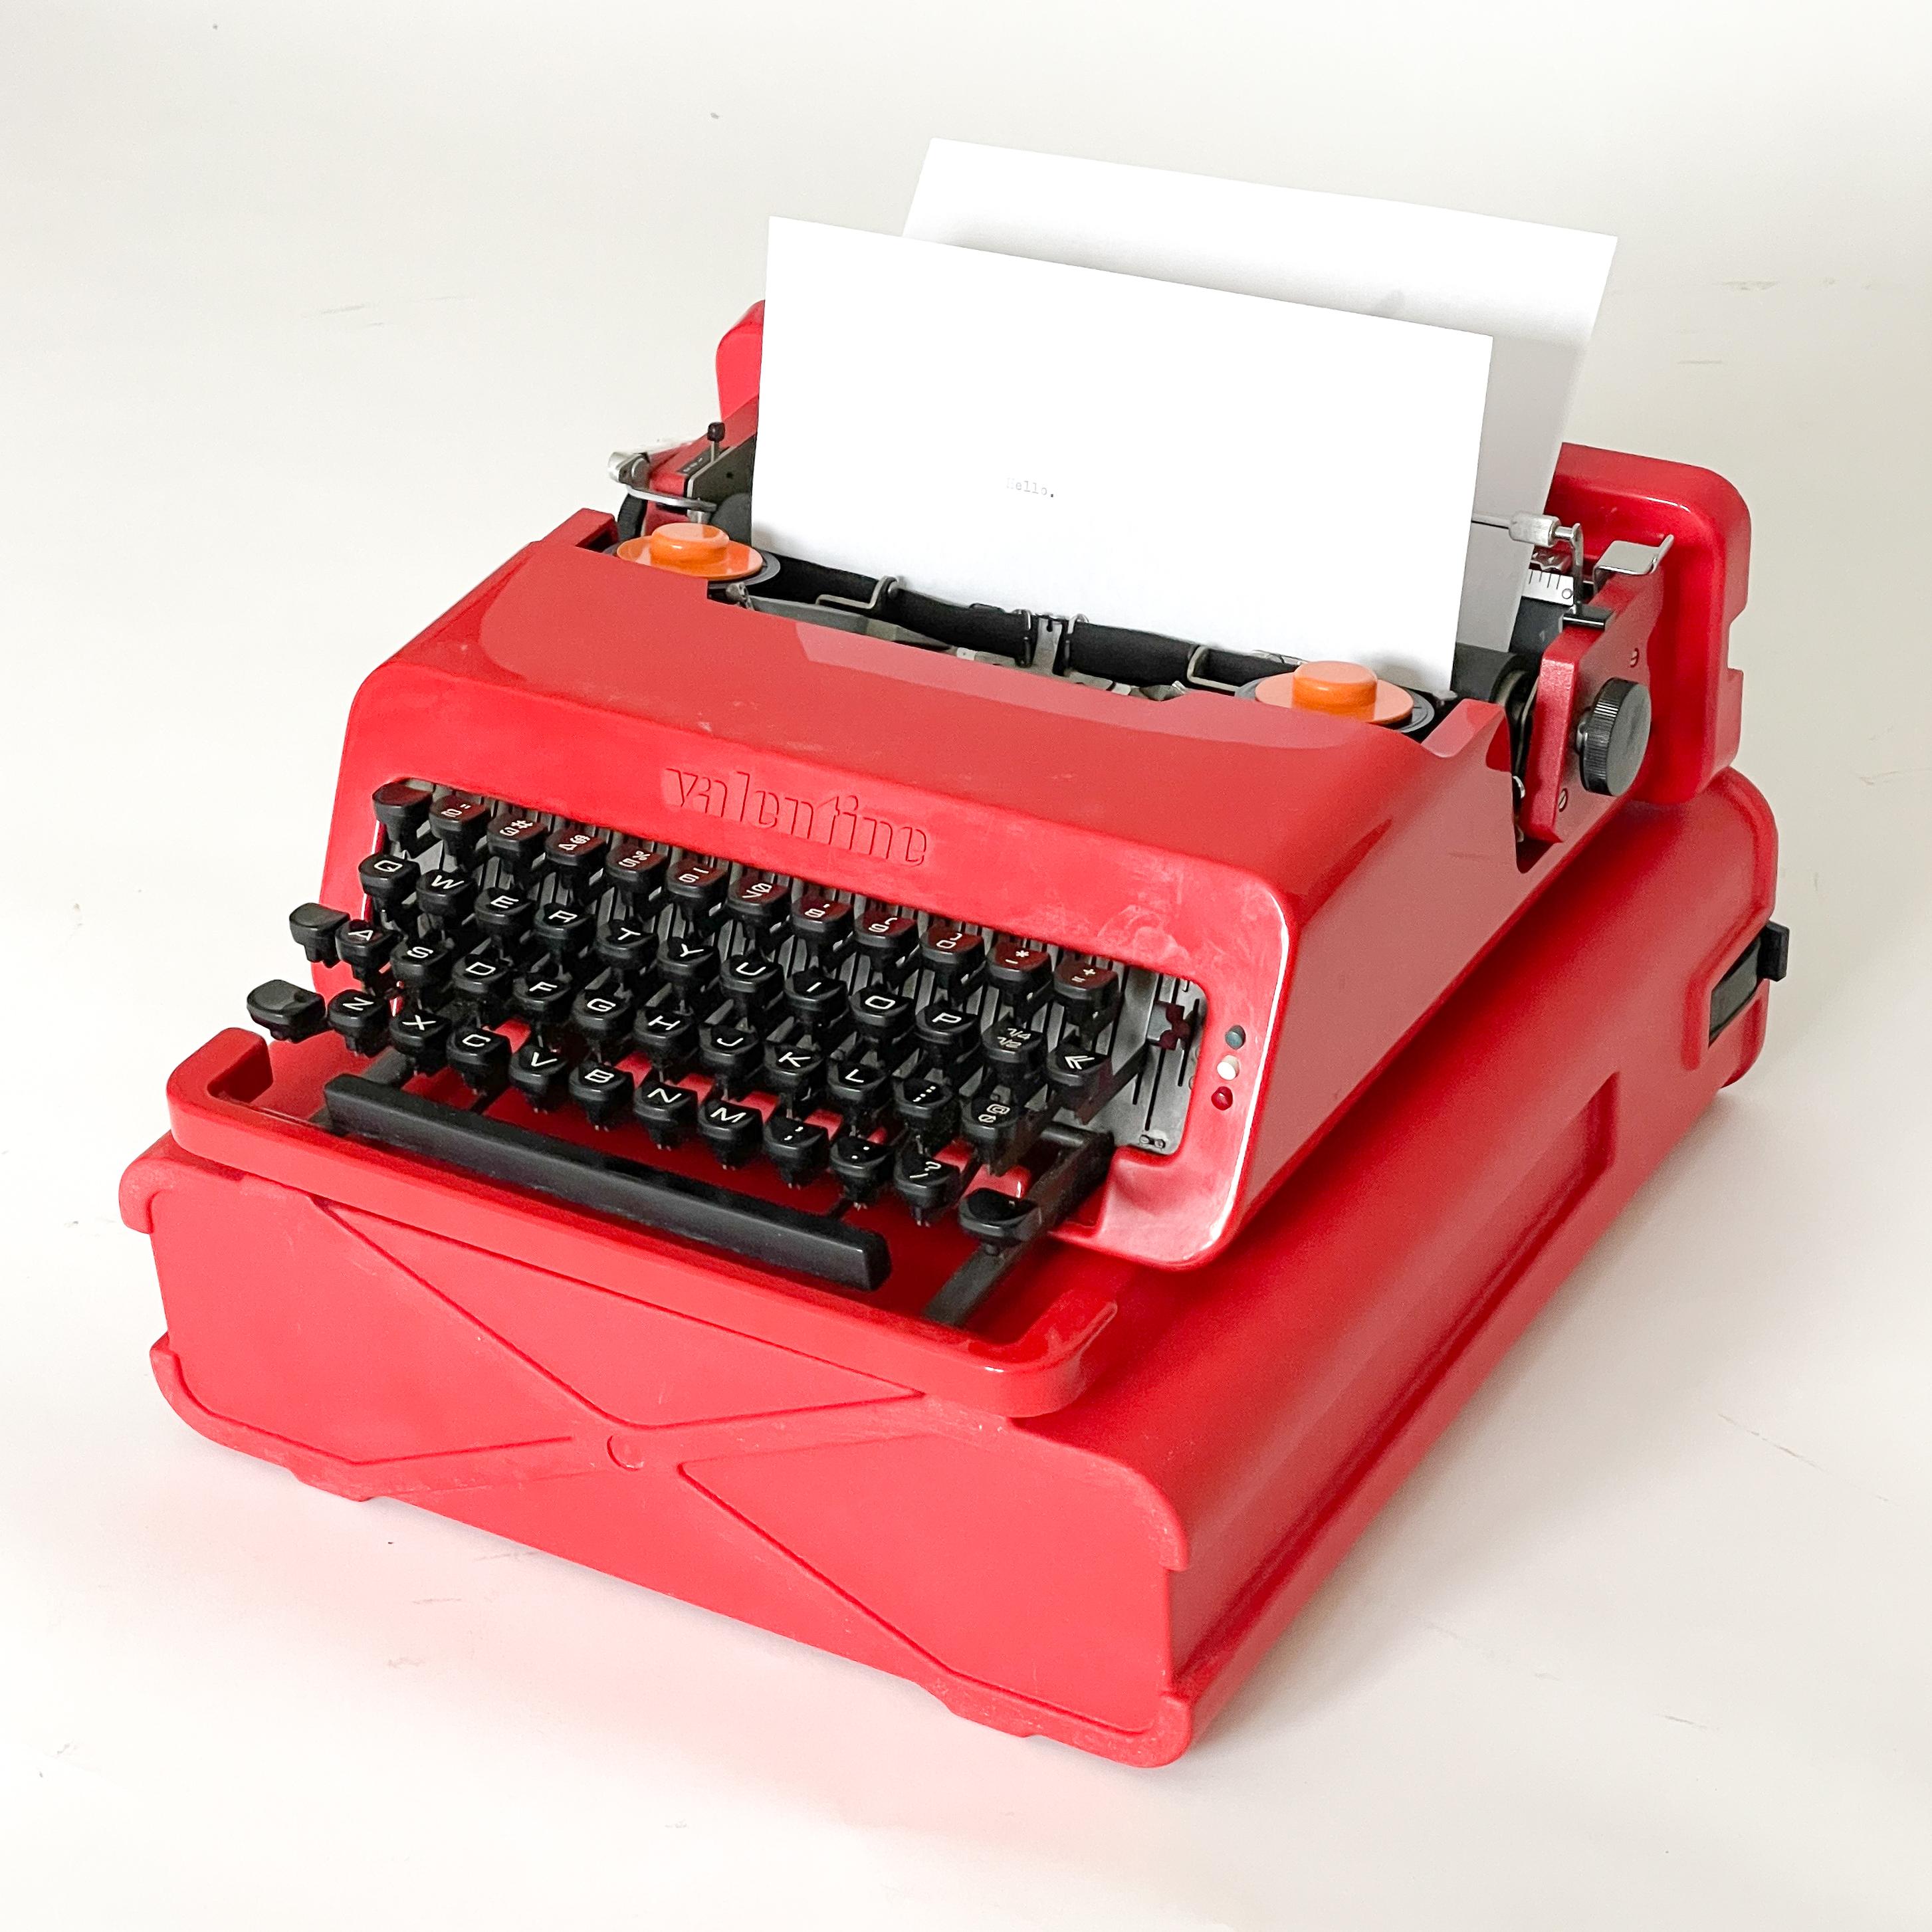 Designed by Ettore Sottsass and Peter King, the typewriter is housed in the permanent collection of the MoMa as an excellent example of pop art.
The typewriter also presaged Sottsass' own evolution before becoming and influential member of the